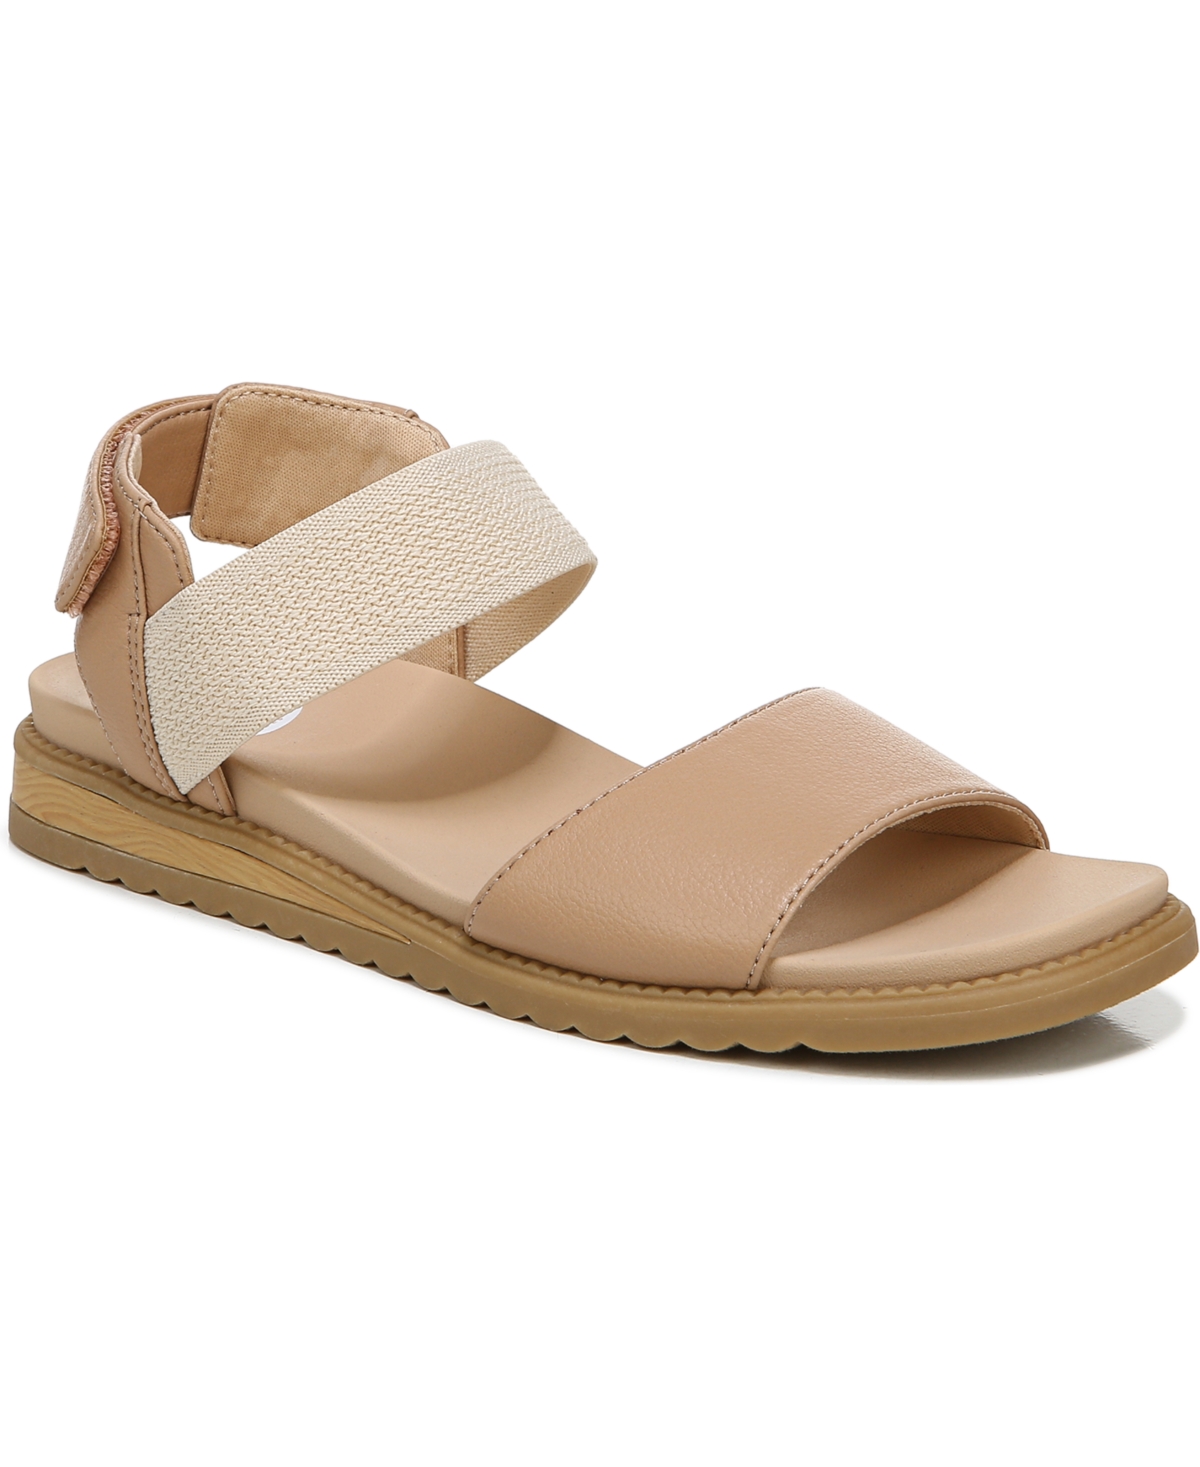 Women's Island-Life Ankle Strap Sandals - Tawny Birch Faux Leather/Fabric